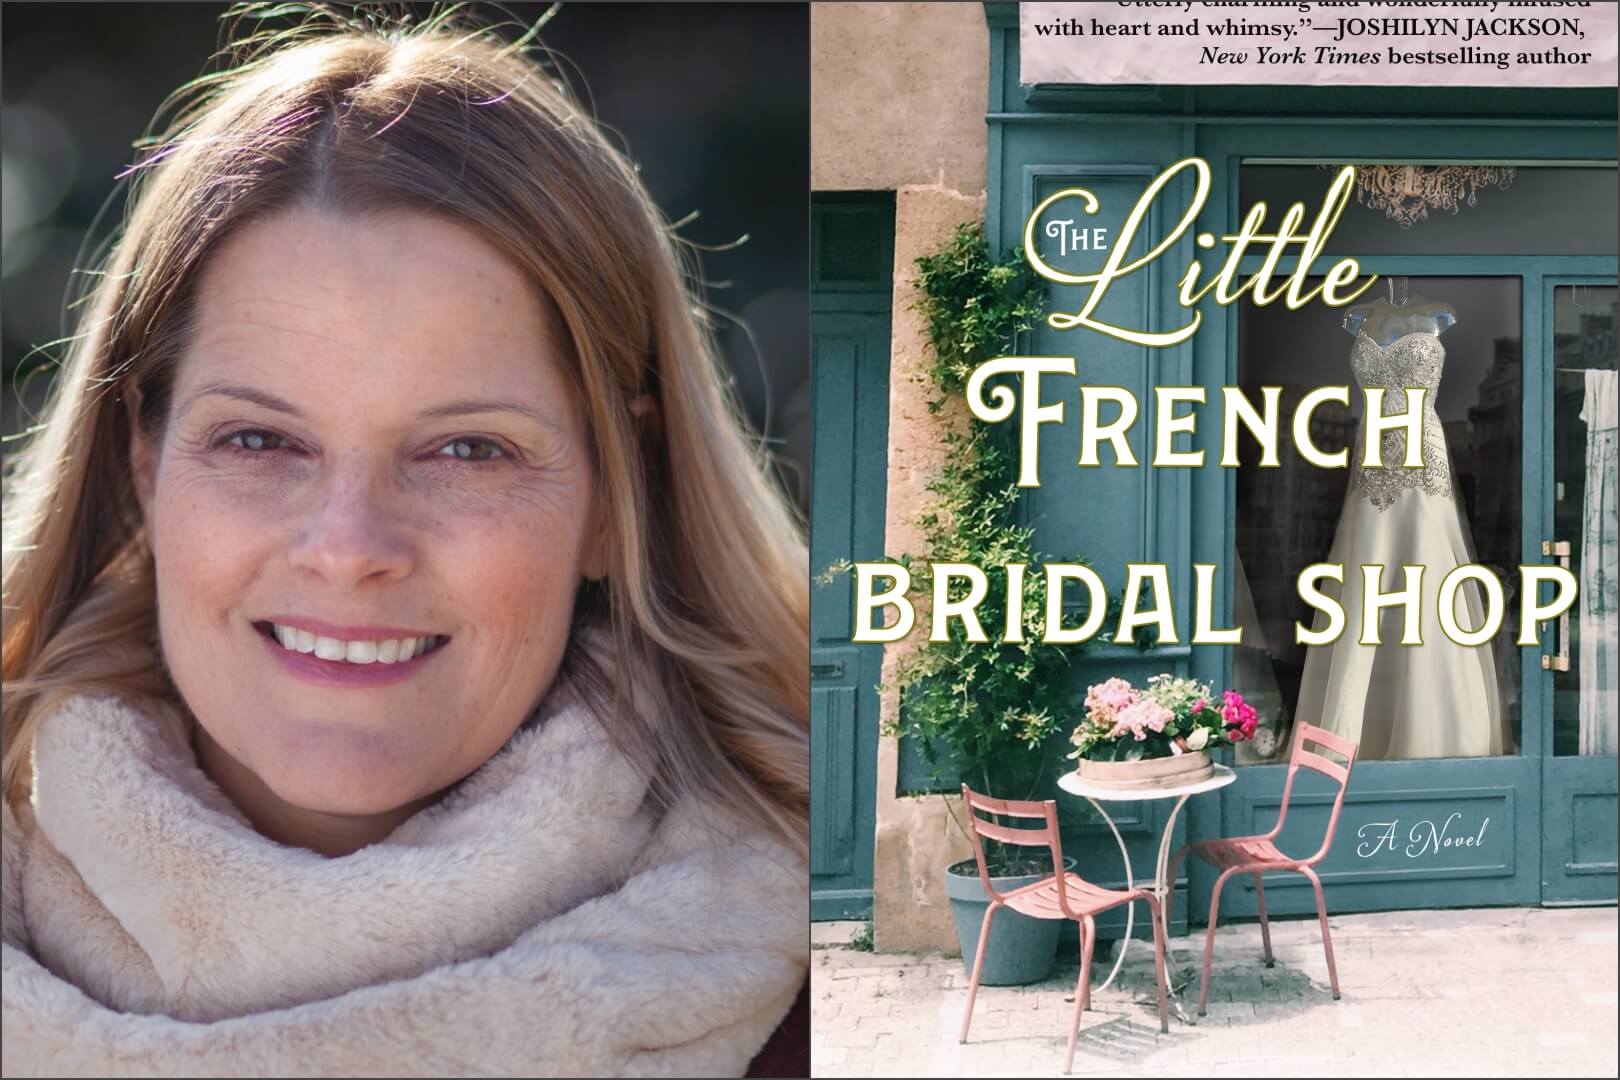 Q&A with Jennifer Dupee, Author of The Little French Bridal Shop